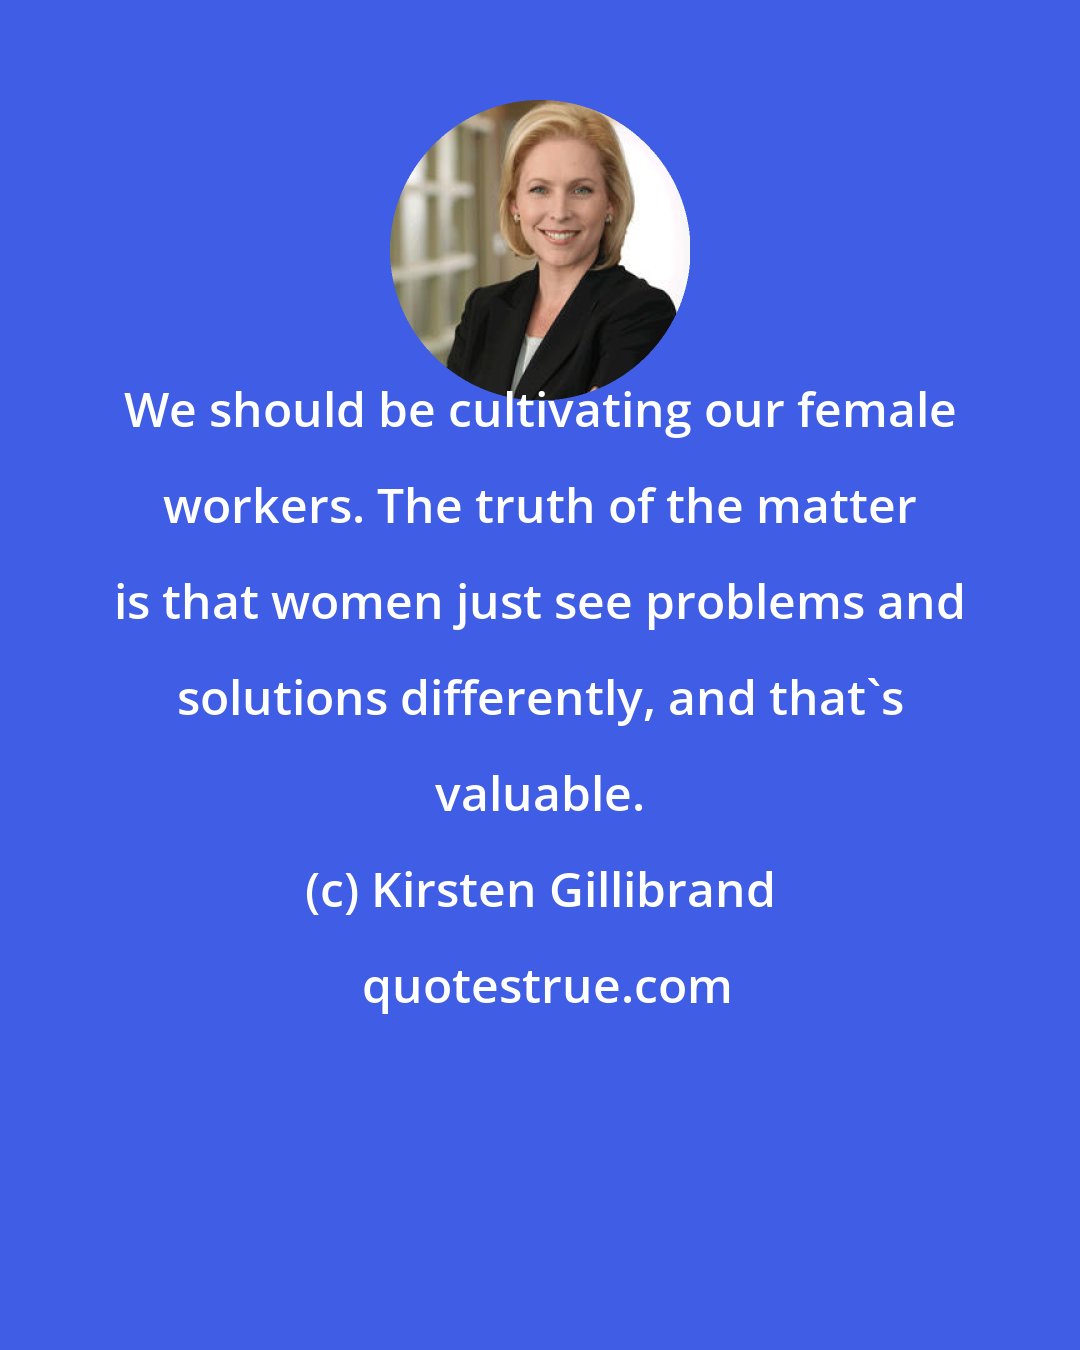 Kirsten Gillibrand: We should be cultivating our female workers. The truth of the matter is that women just see problems and solutions differently, and that's valuable.